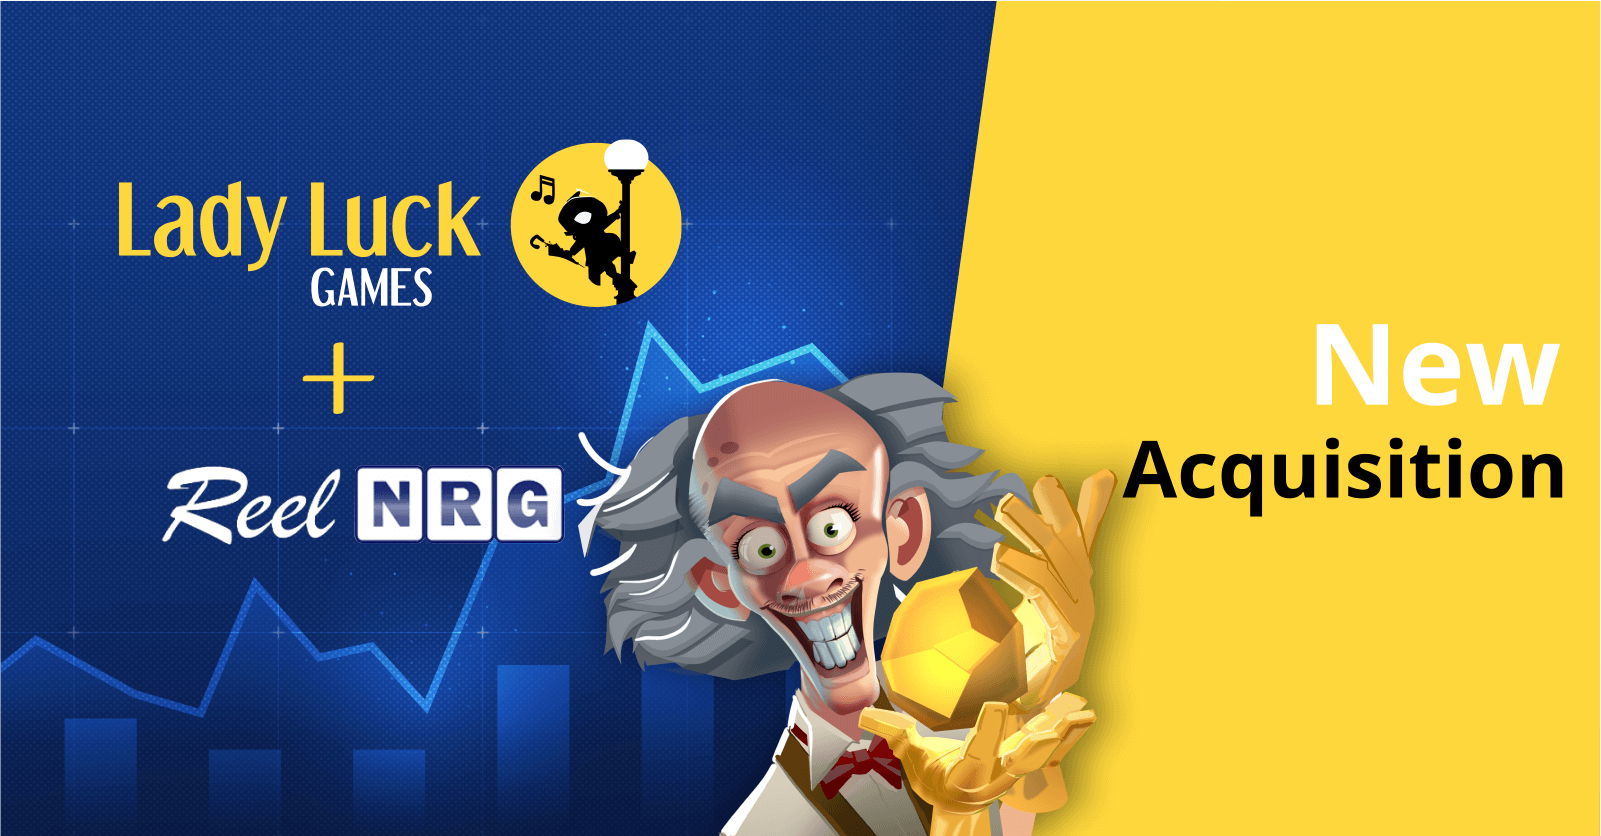 Sweden – LL Lucky Games set to acquire ReelNRG